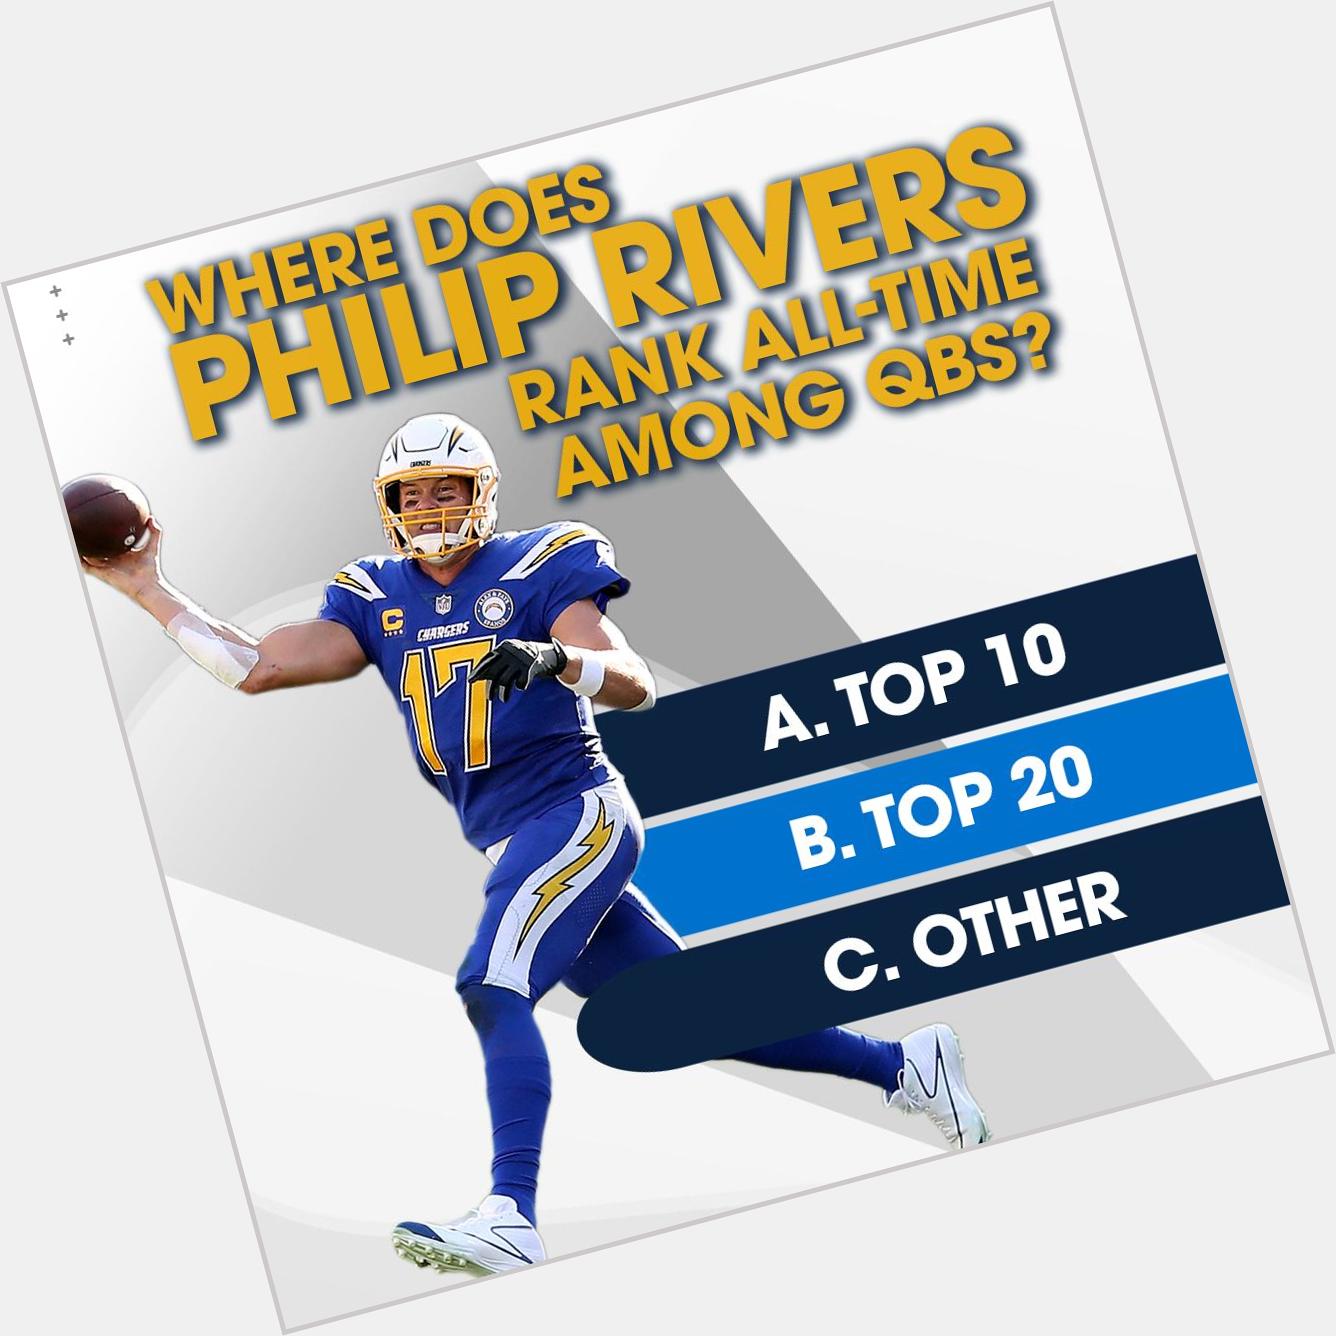 Happy 37th birthday, Philip Rivers!

Where do you rank the legend all-time? 